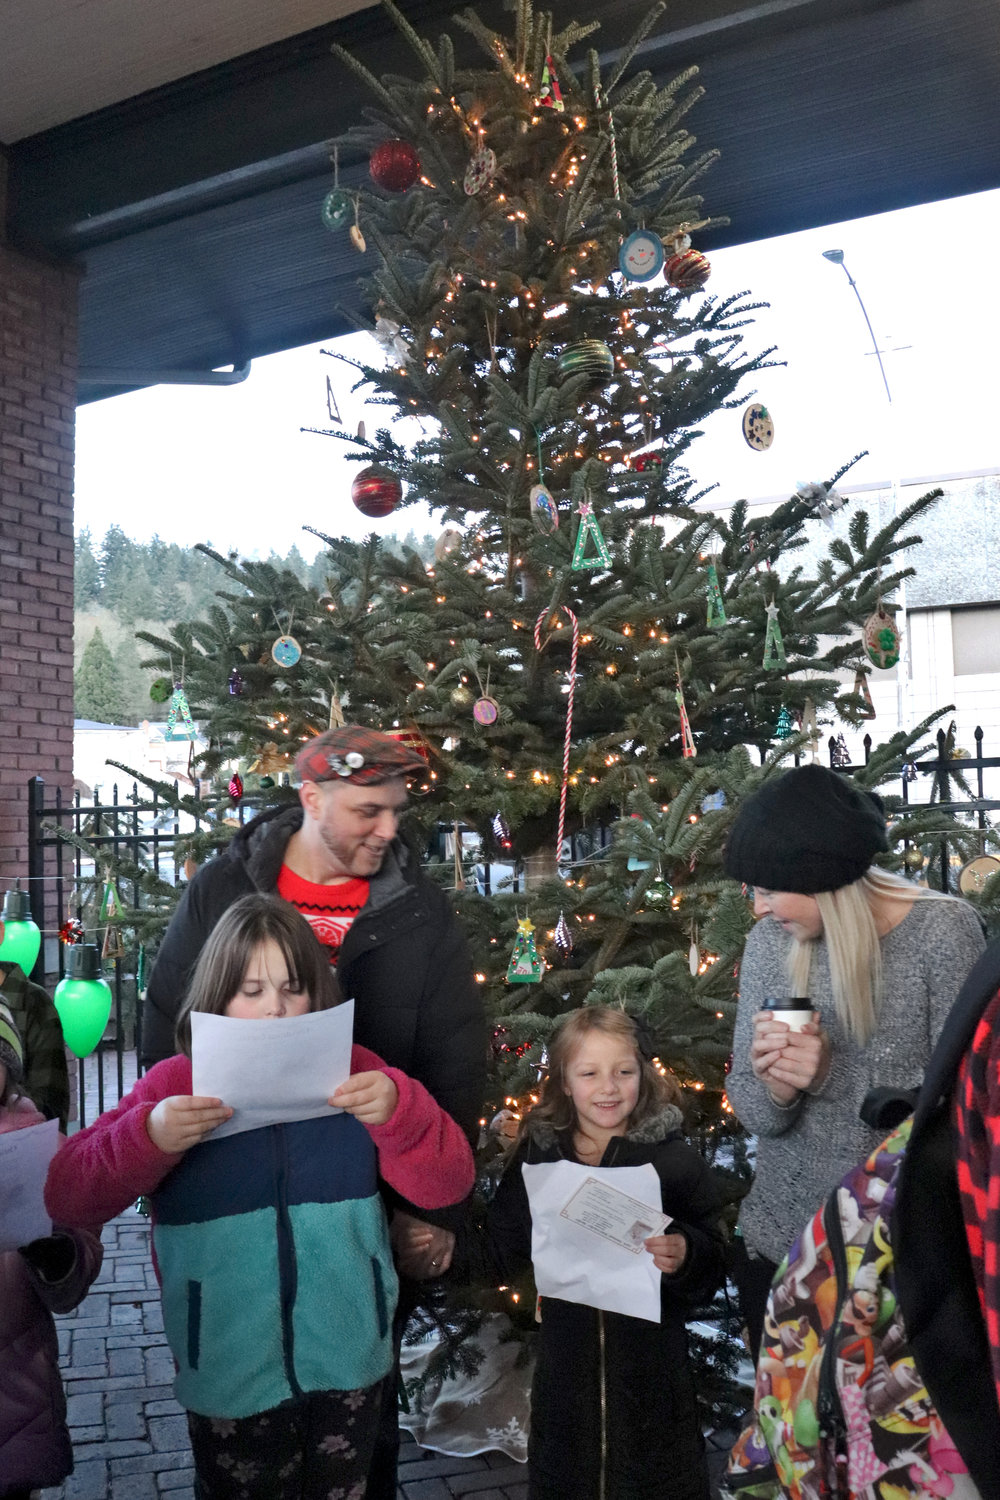 Finley-Jean Filer, center, sings carols with parents Tim Filer and Alyssa Rei during the City of Chehalis Christmas tree lighting ceremony outside the Lewis County Historical Museum on Saturday.